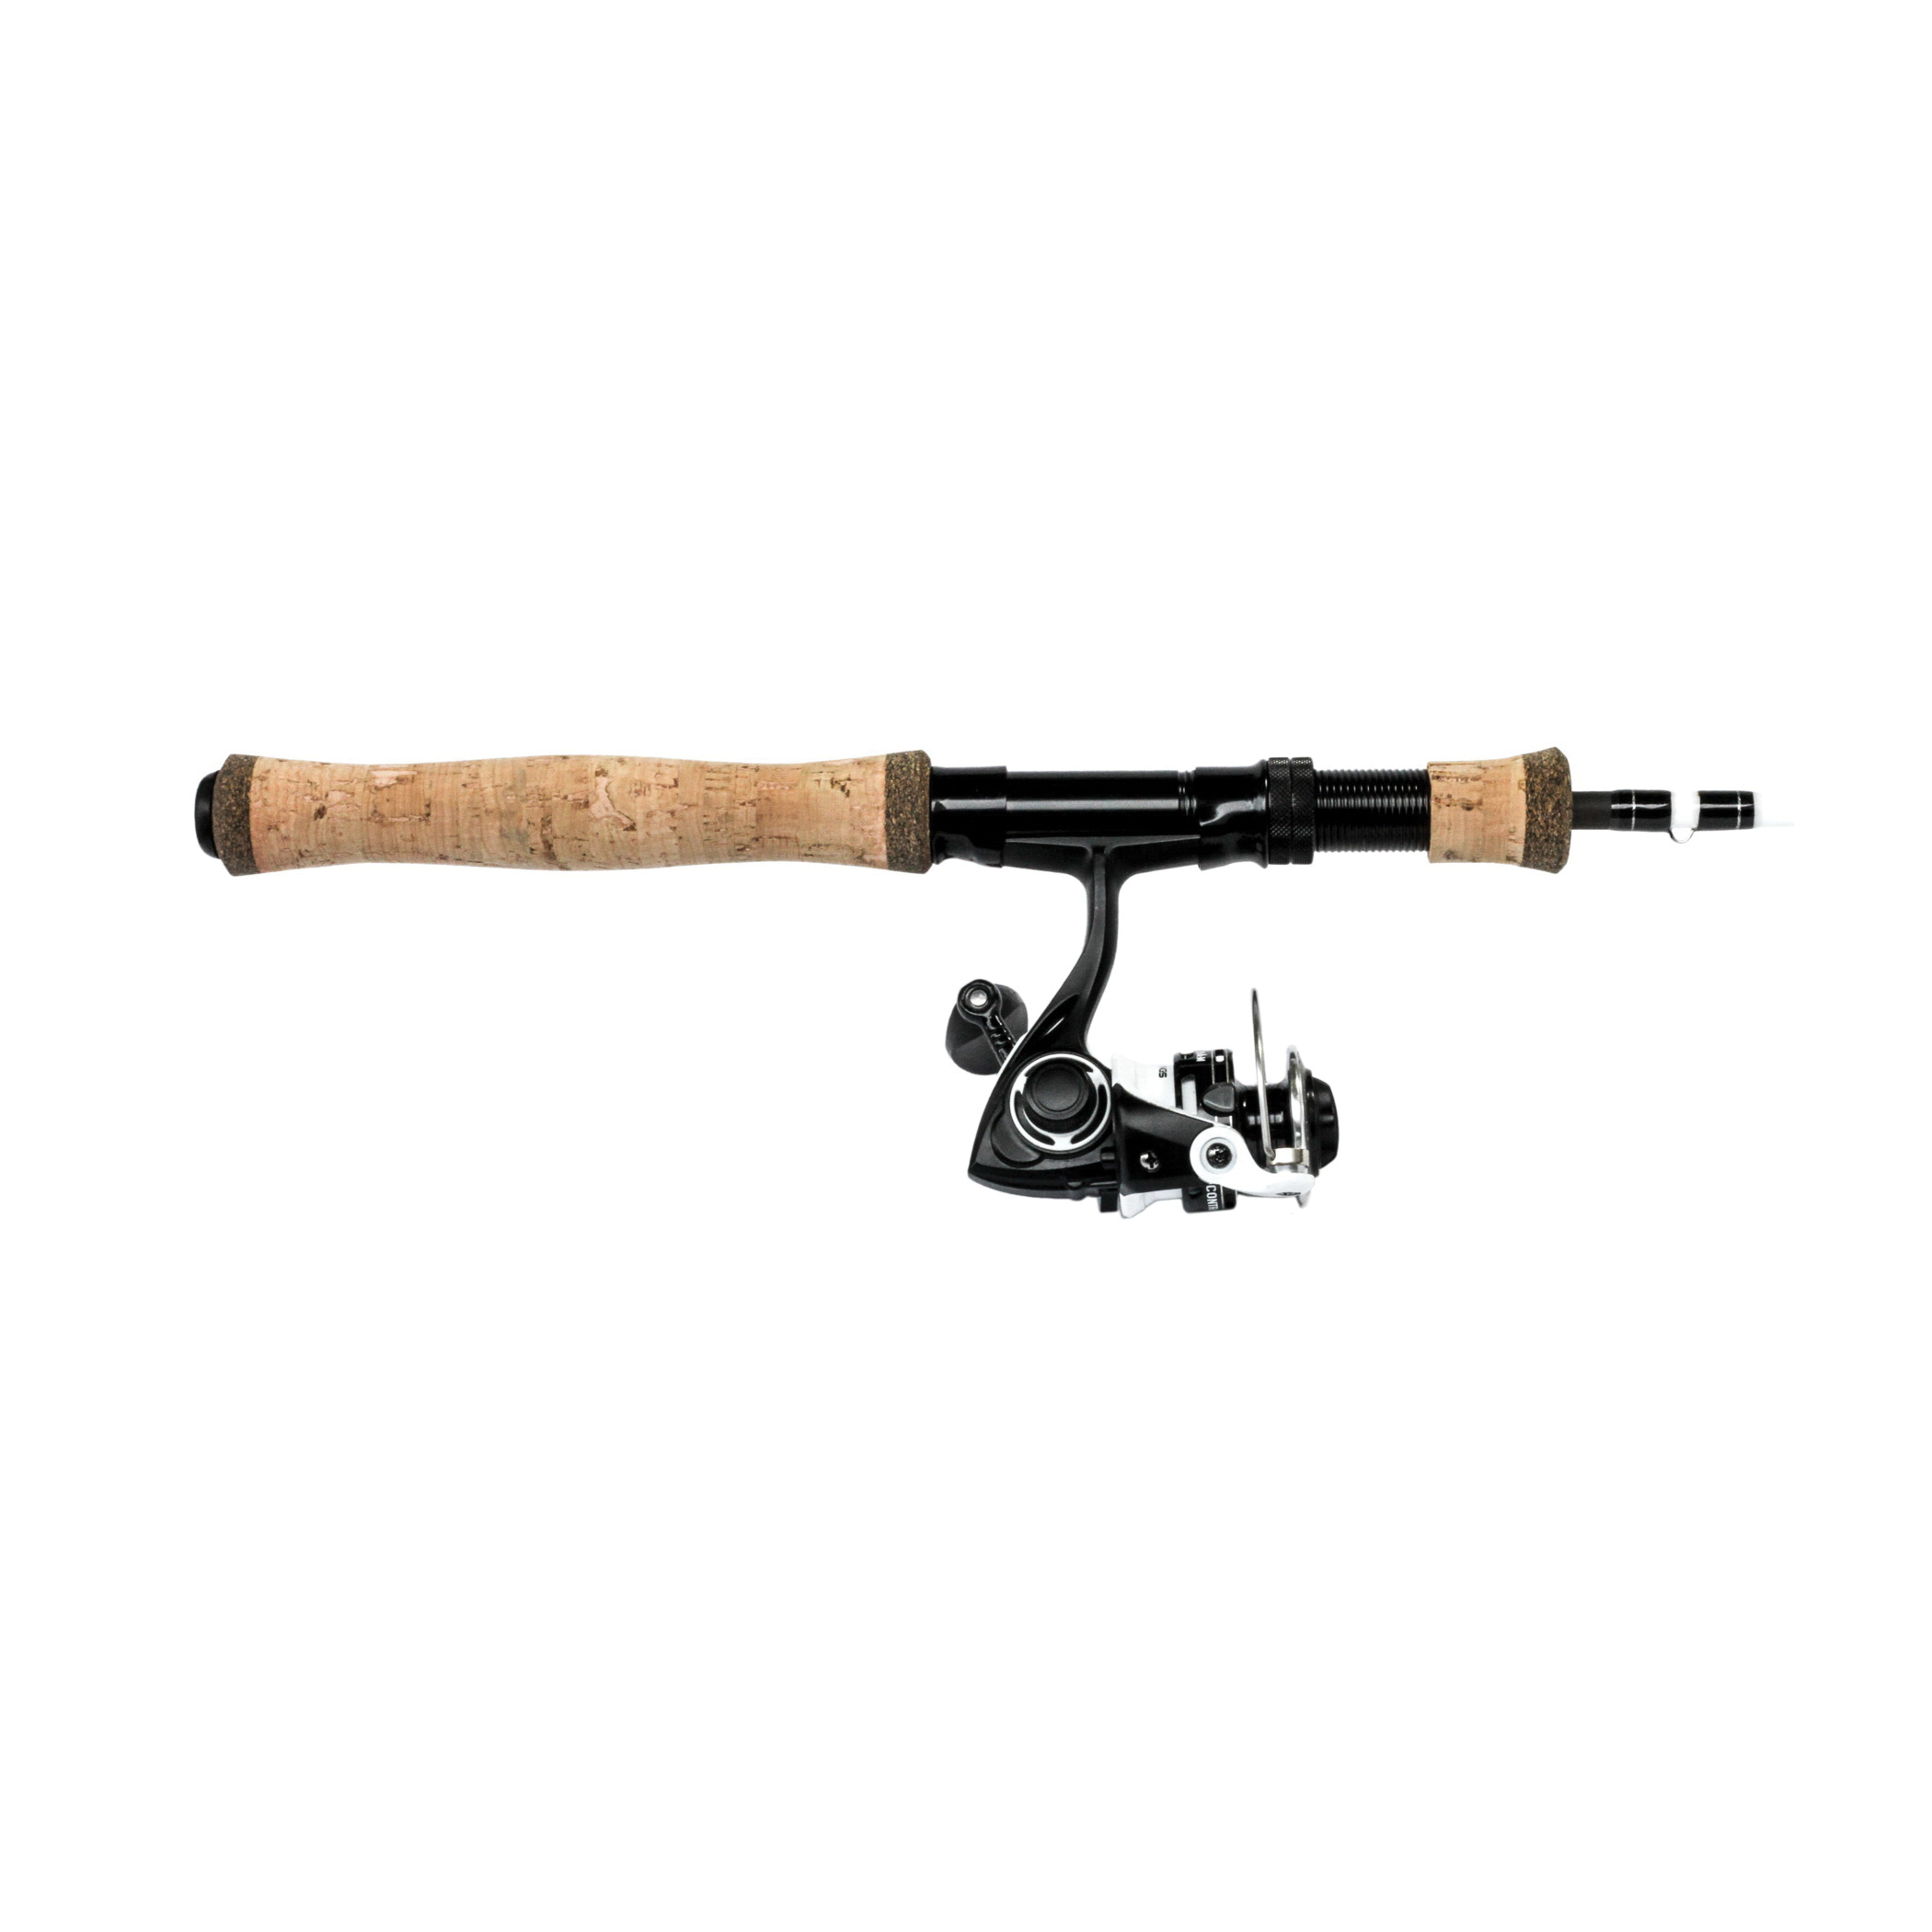 Maxxon Outfitters MO 76V5-4 Versa Fly Rod, 7 ft 6 in OAL